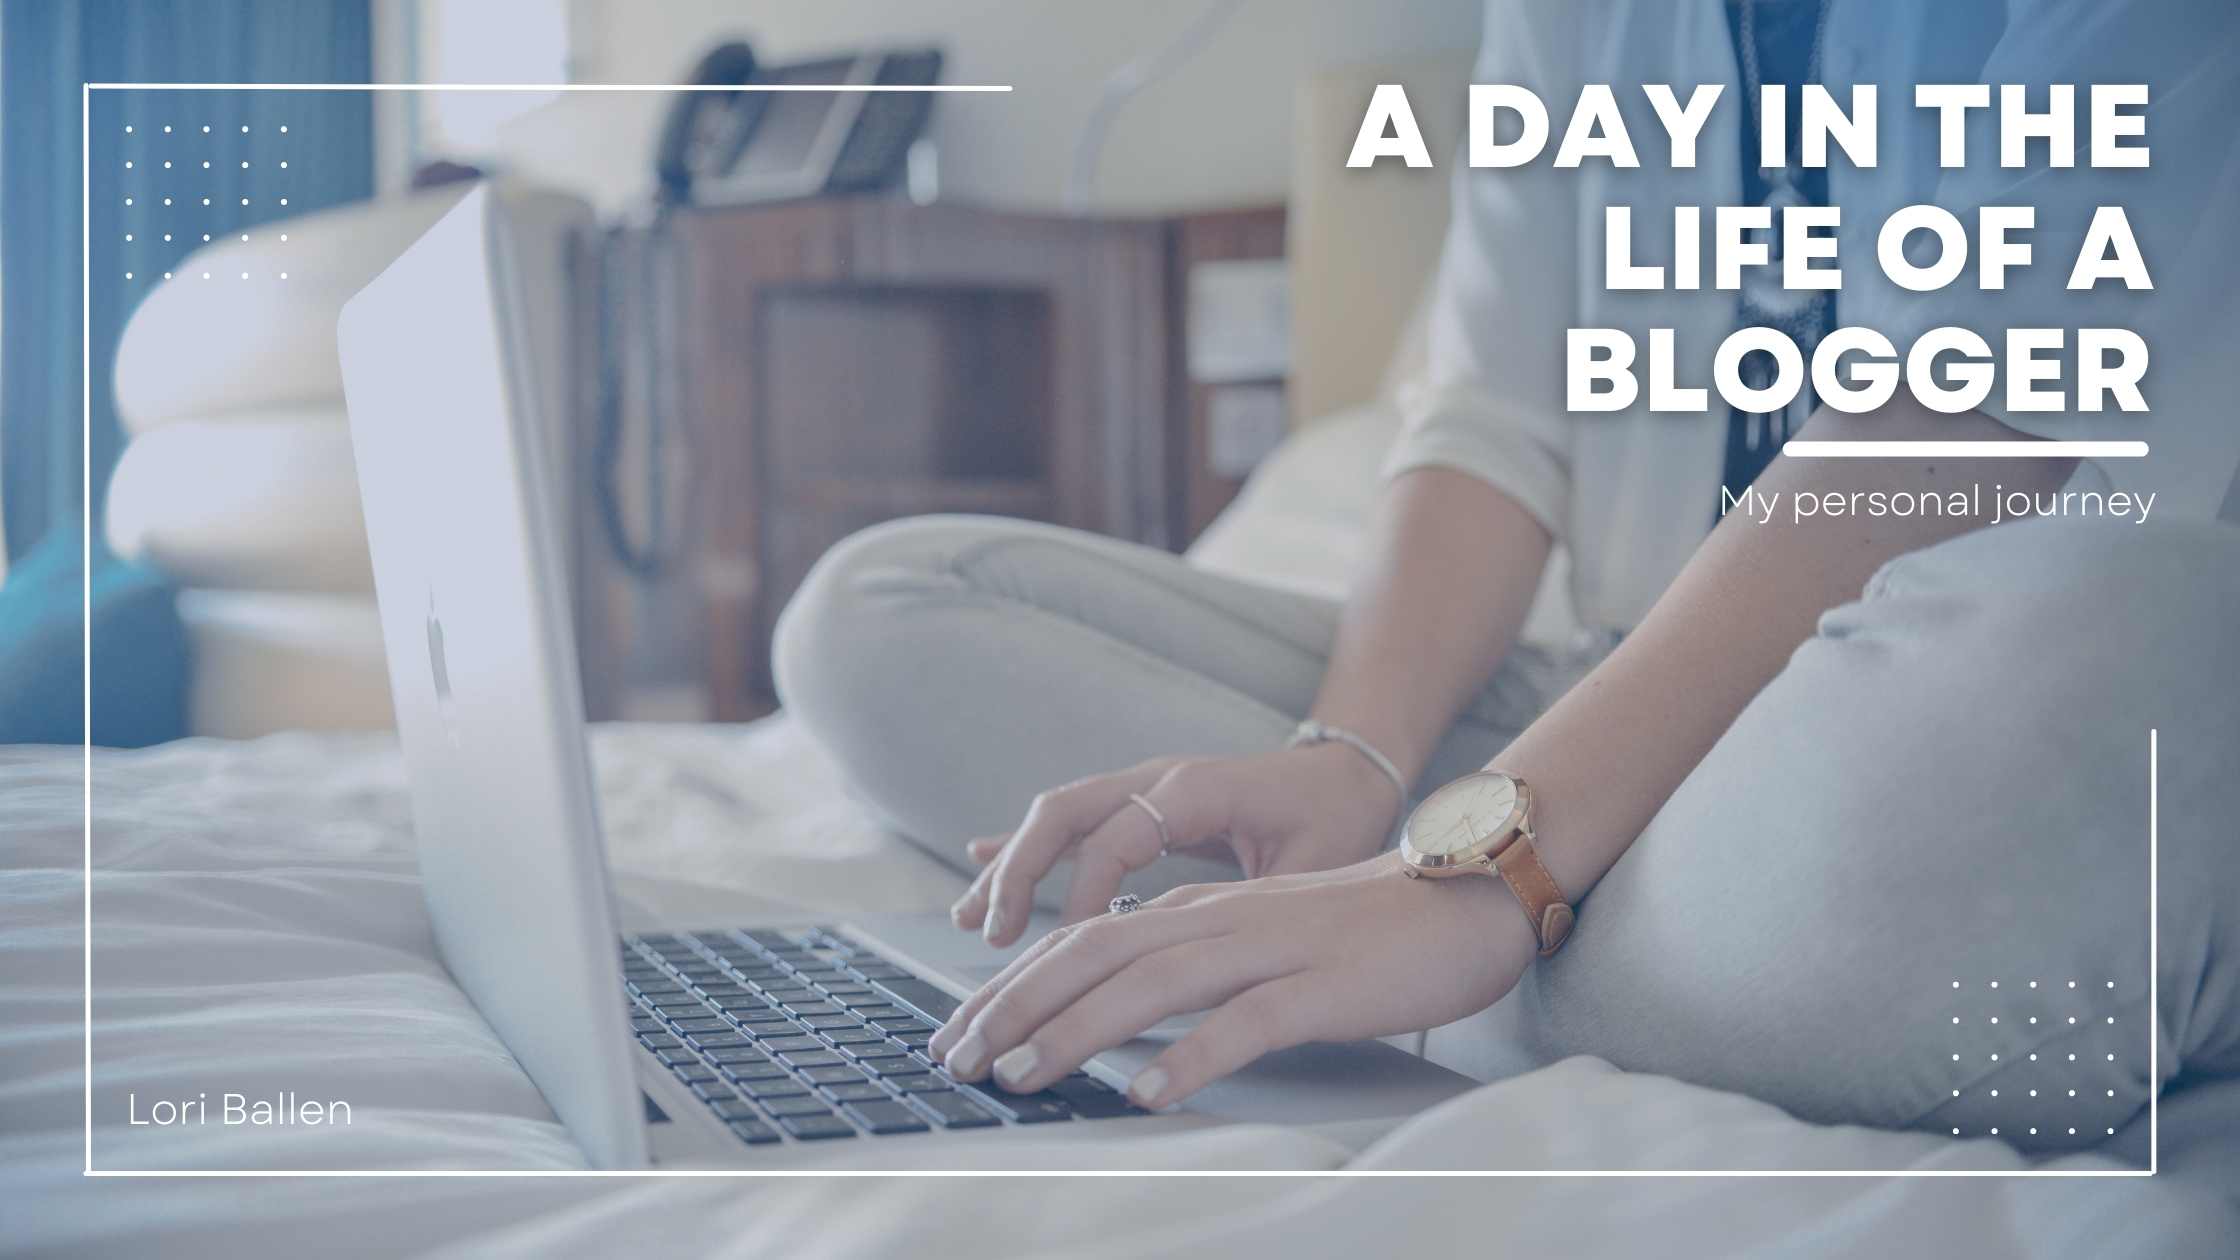 A Day in the Life of a Blogger